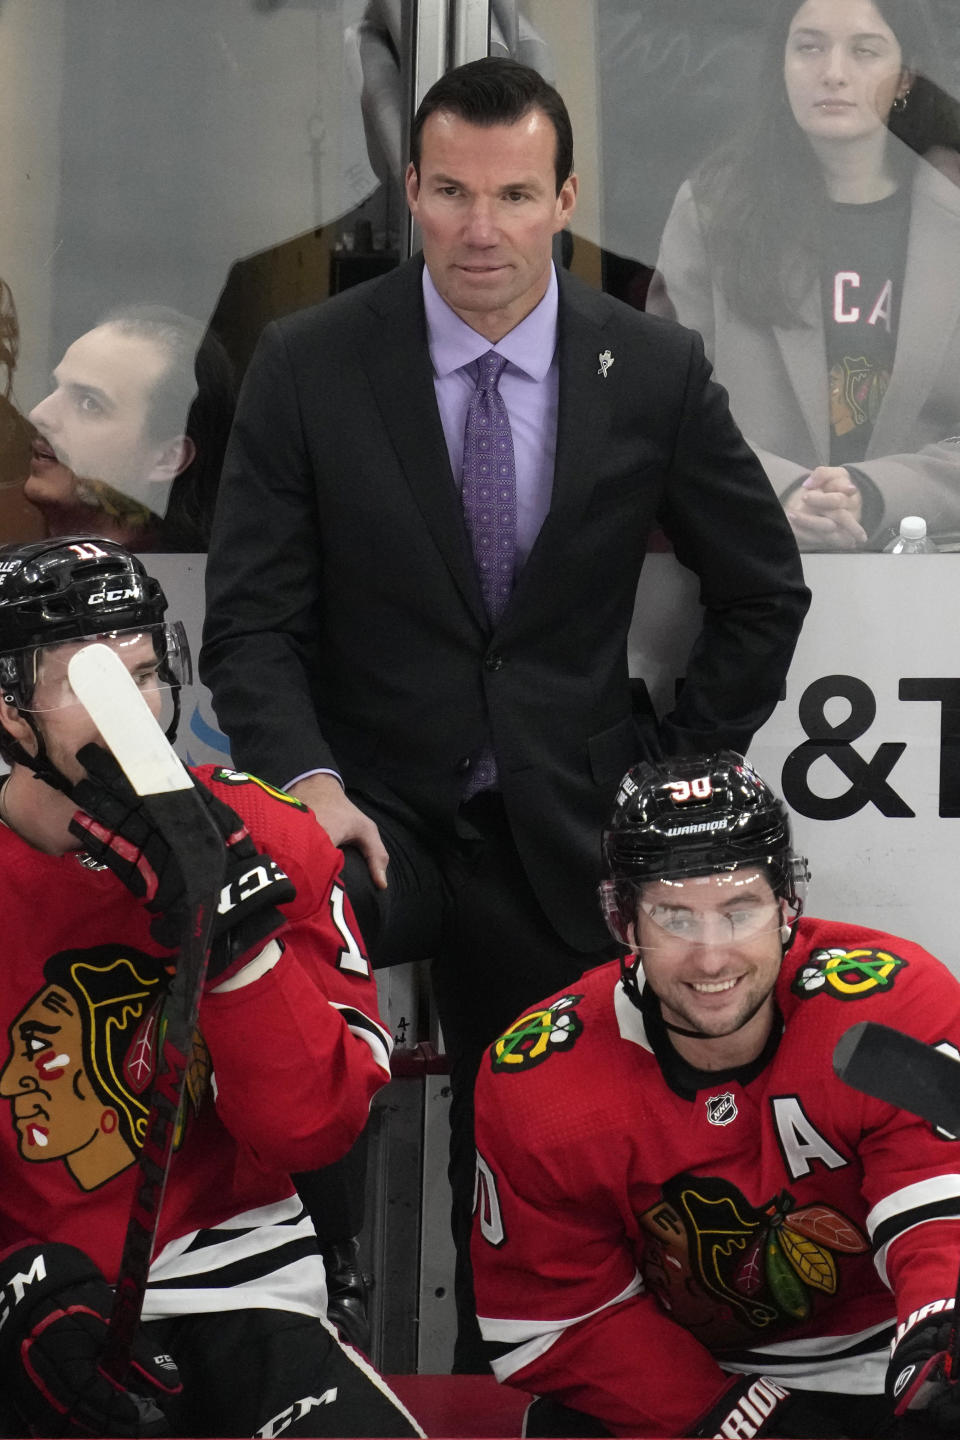 Chicago Blackhawks head coach Luke Richardson watches his team during the second period of an NHL hockey game against the Vancouver Canucks in Chicago, Sunday, March 26, 2023. (AP Photo/Nam Y. Huh)